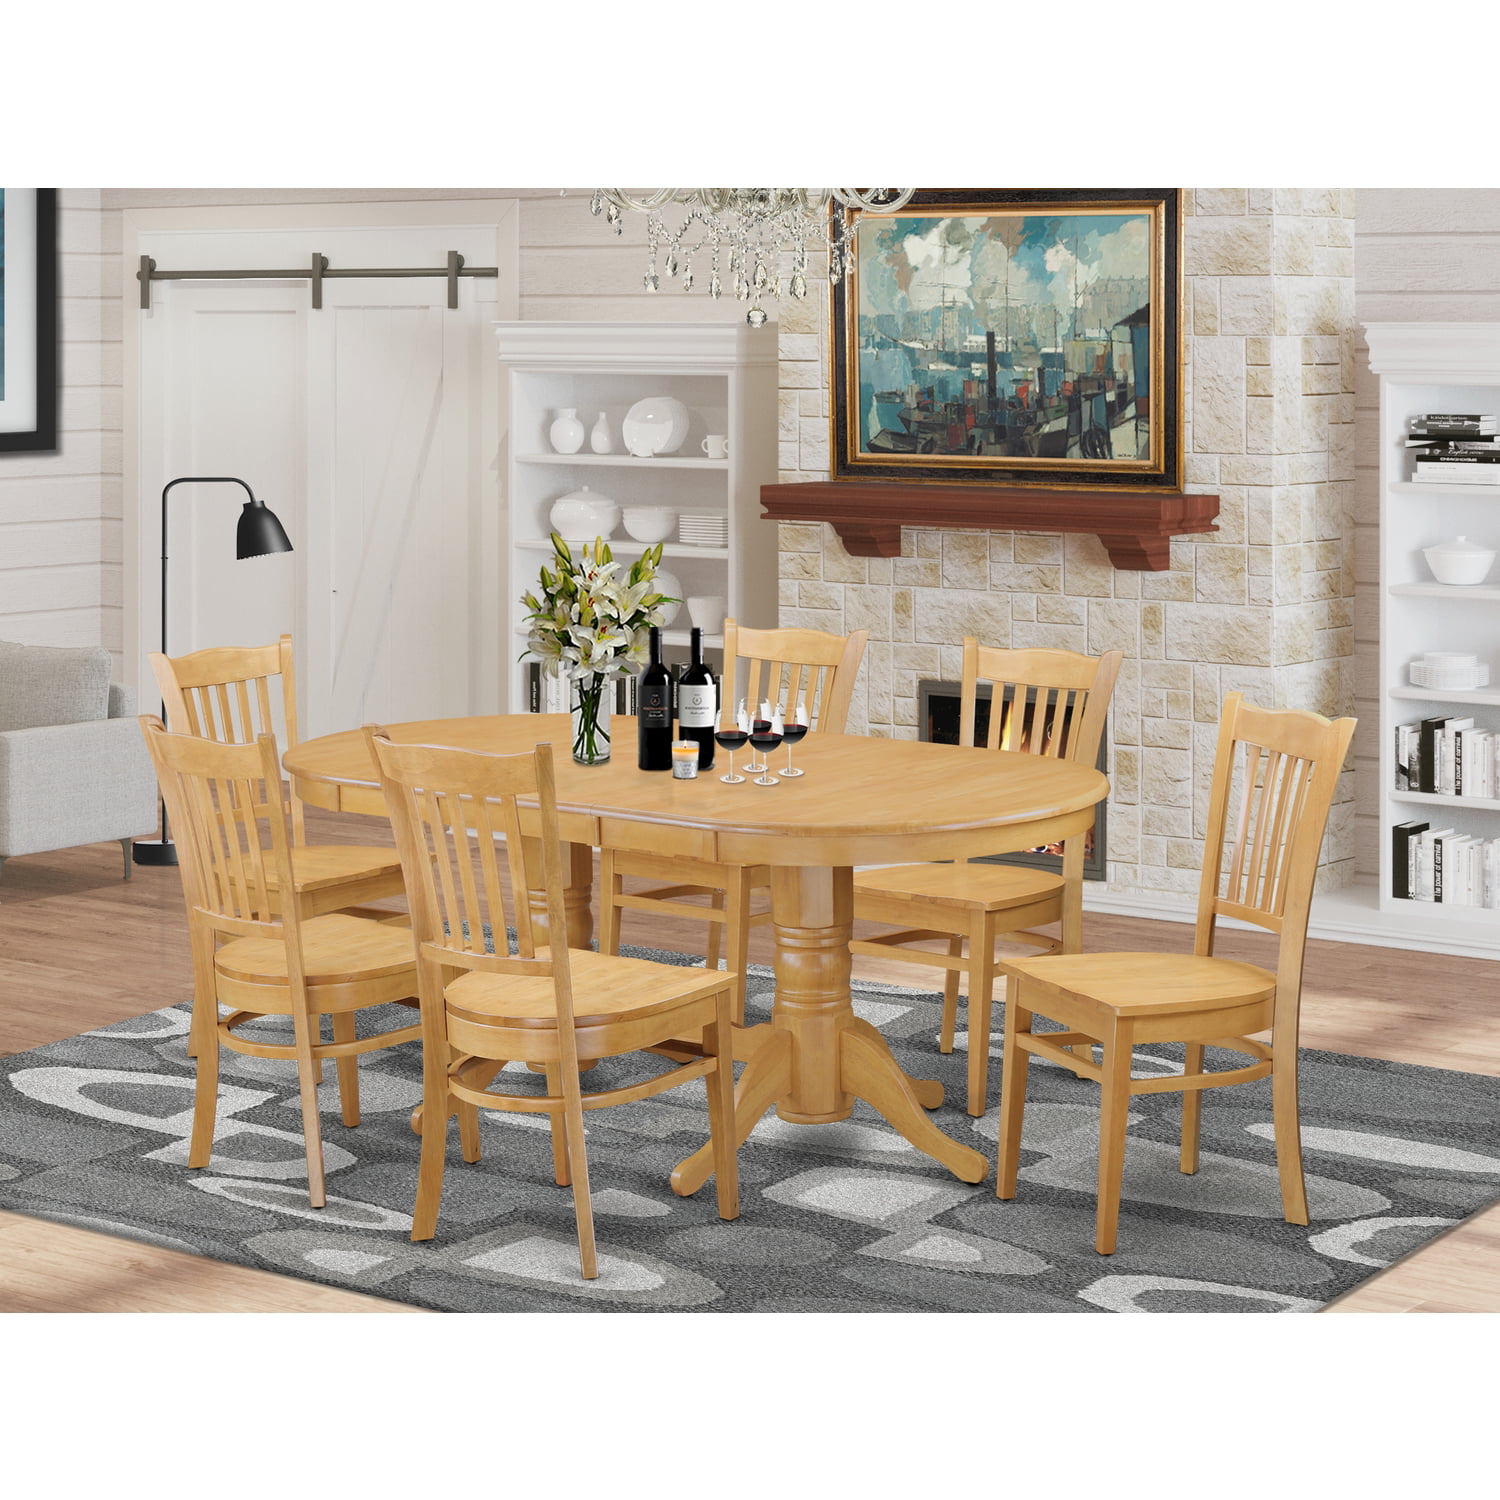 Small Kitchen Table Set Dining Table And Kitchen ChairsFinishOak